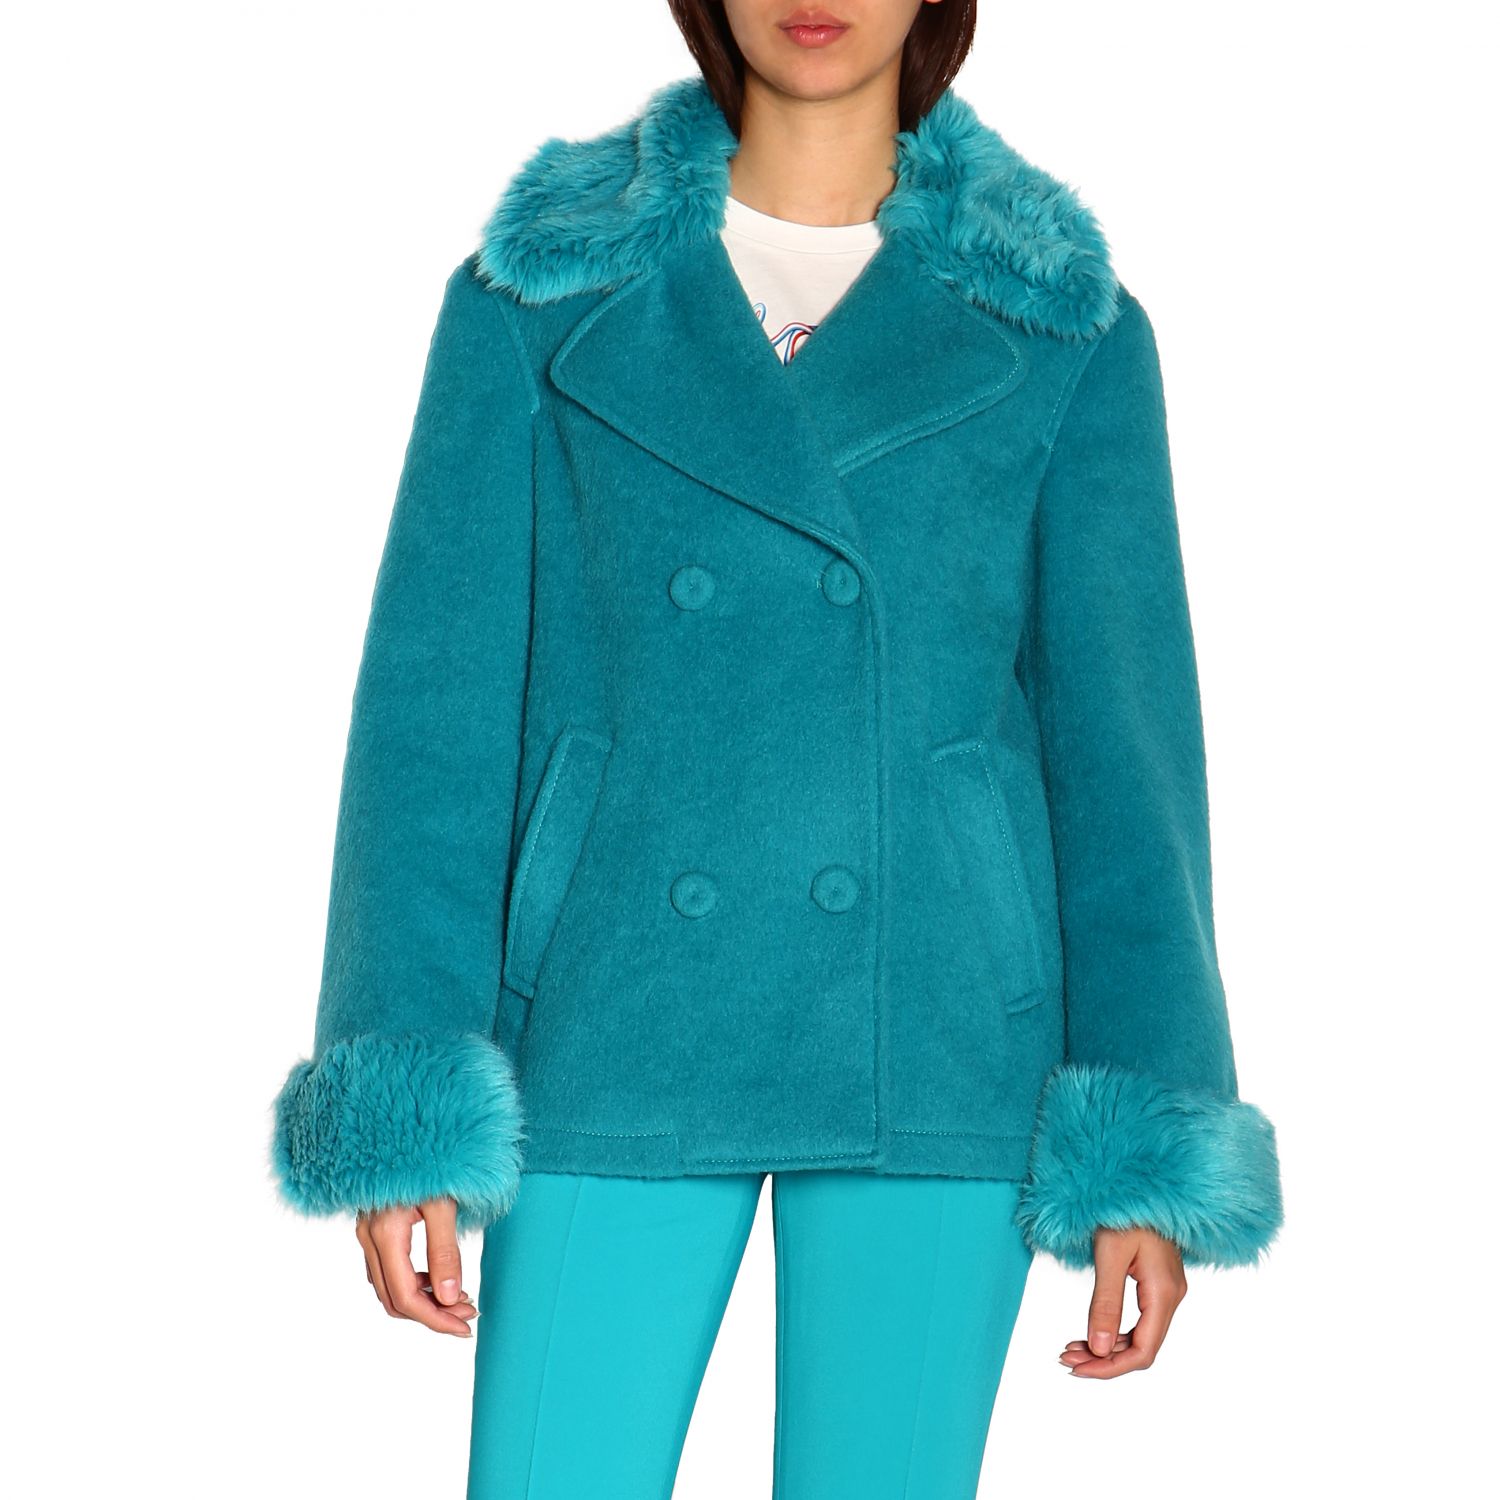 Moschino Couture Outlet: Jacket women - Turquoise | Fur Coats Moschino ...